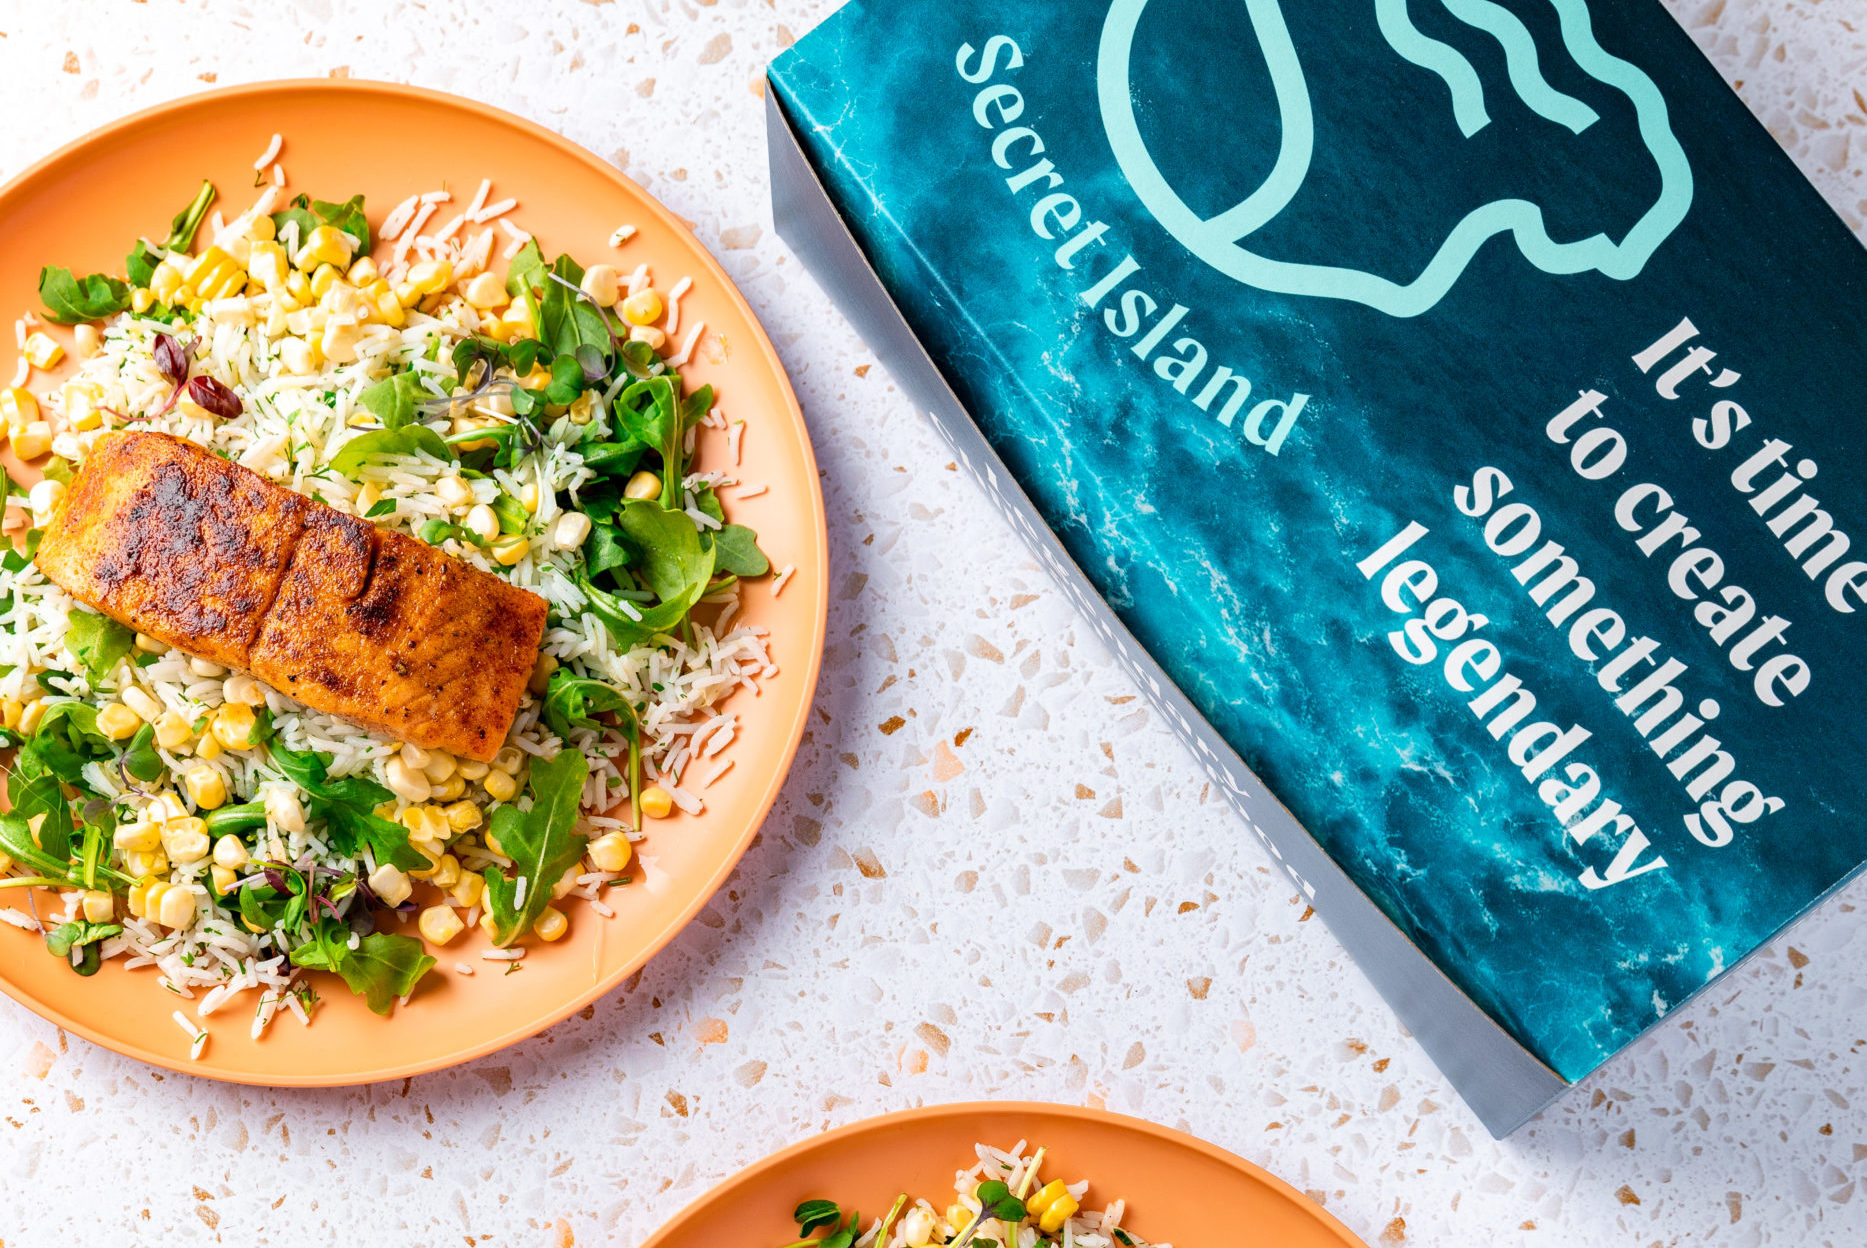 Spiced salmon on bed of greens and basmati rice. Blue box with the words "It's time to create something legendary" sits beside the dish.